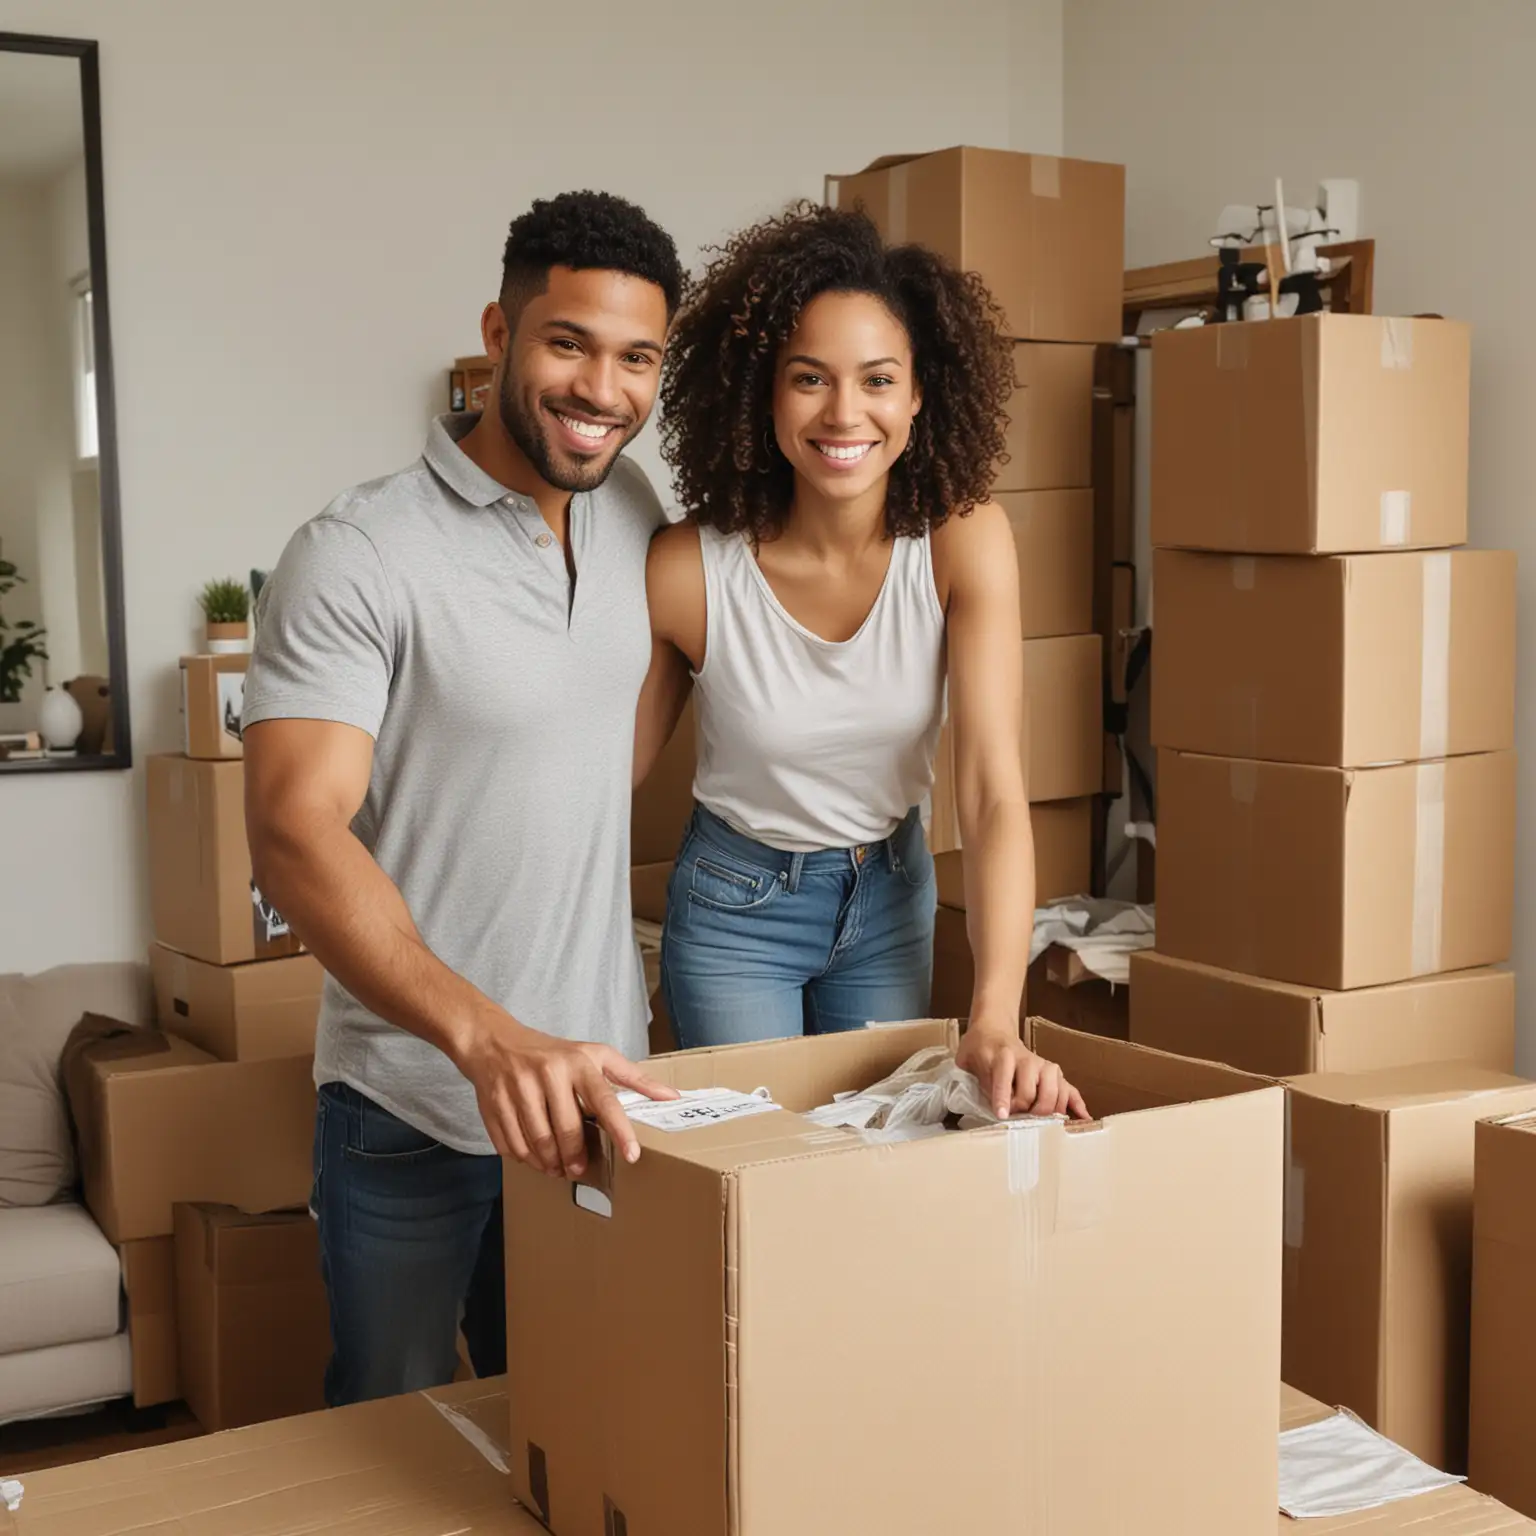 MixedRace Couple Packing Boxes in Their Urban Apartment